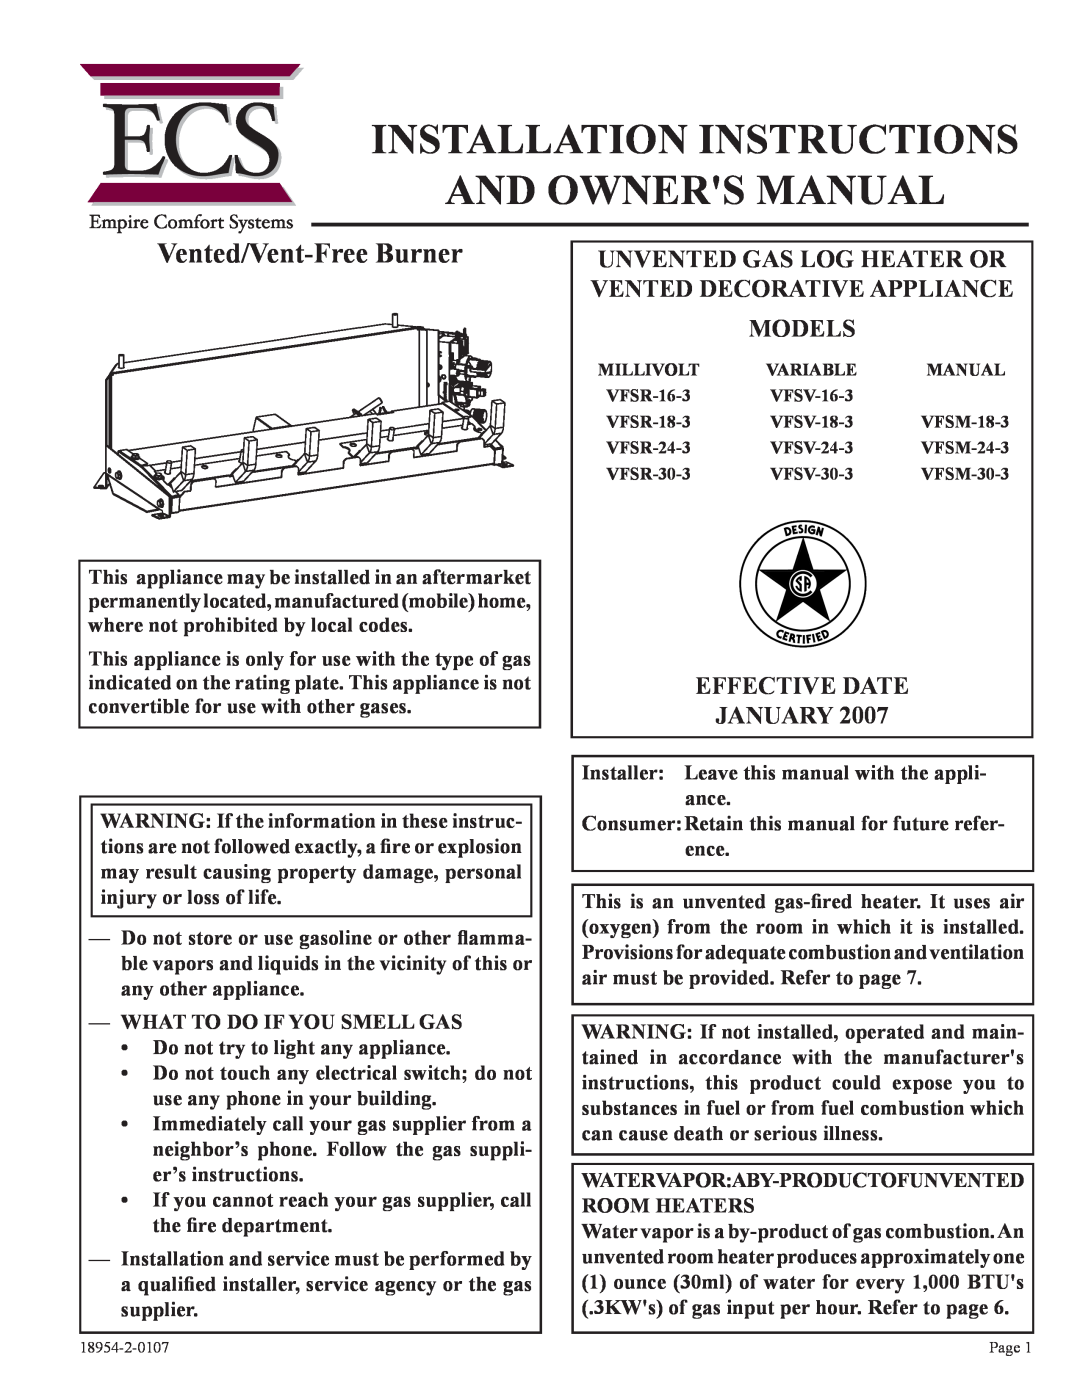 Empire Comfort Systems VFSM-30-3 installation instructions Vented/Vent-FreeBurner, Models, Effective Date January 